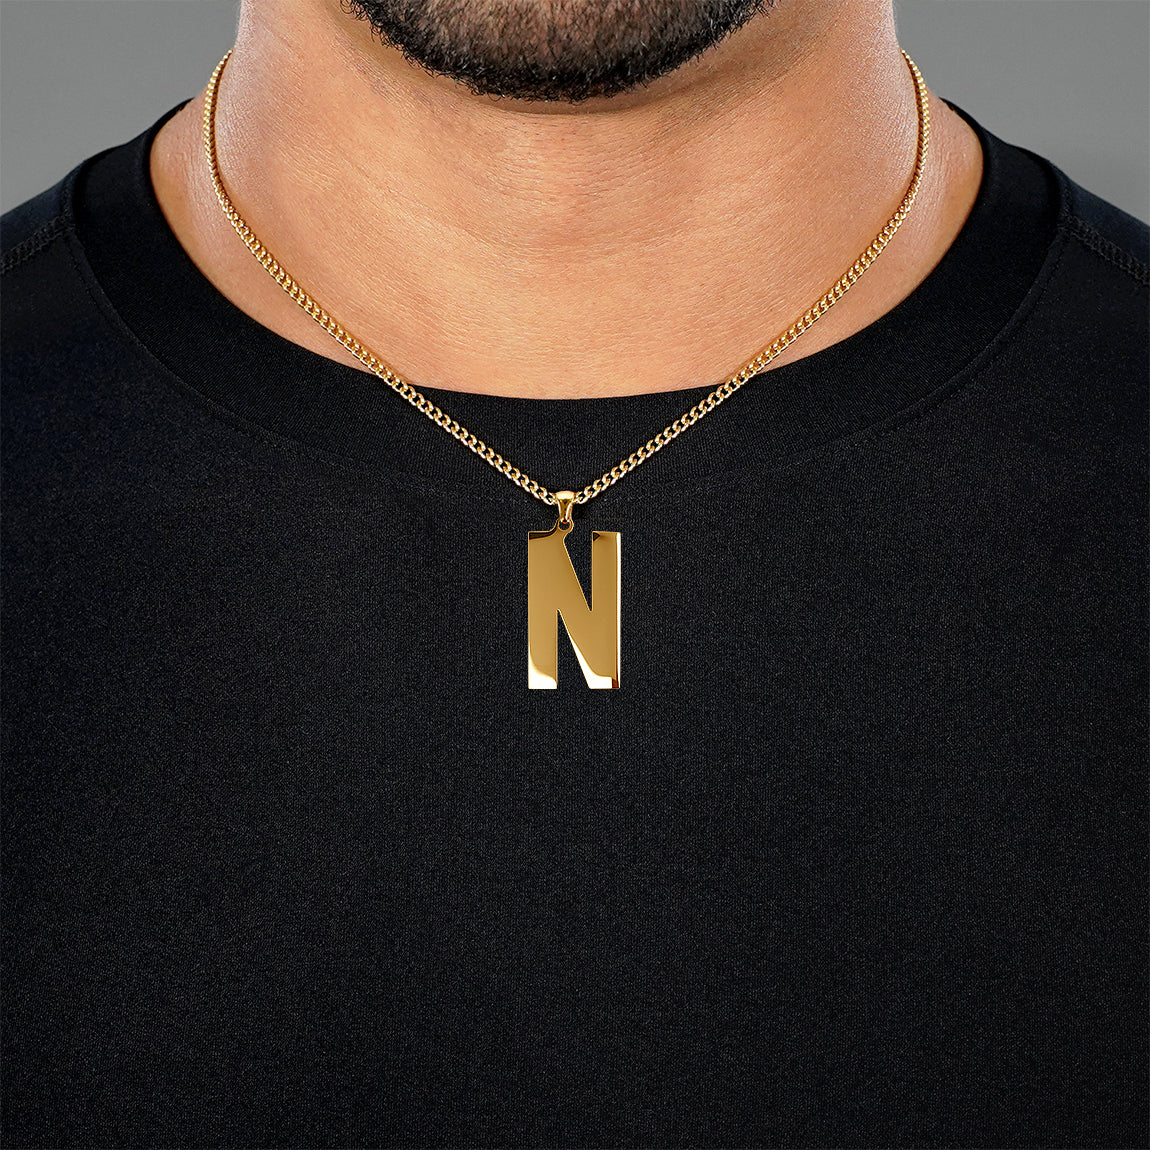 N Letter Pendant with Chain Necklace - Gold Plated Stainless Steel